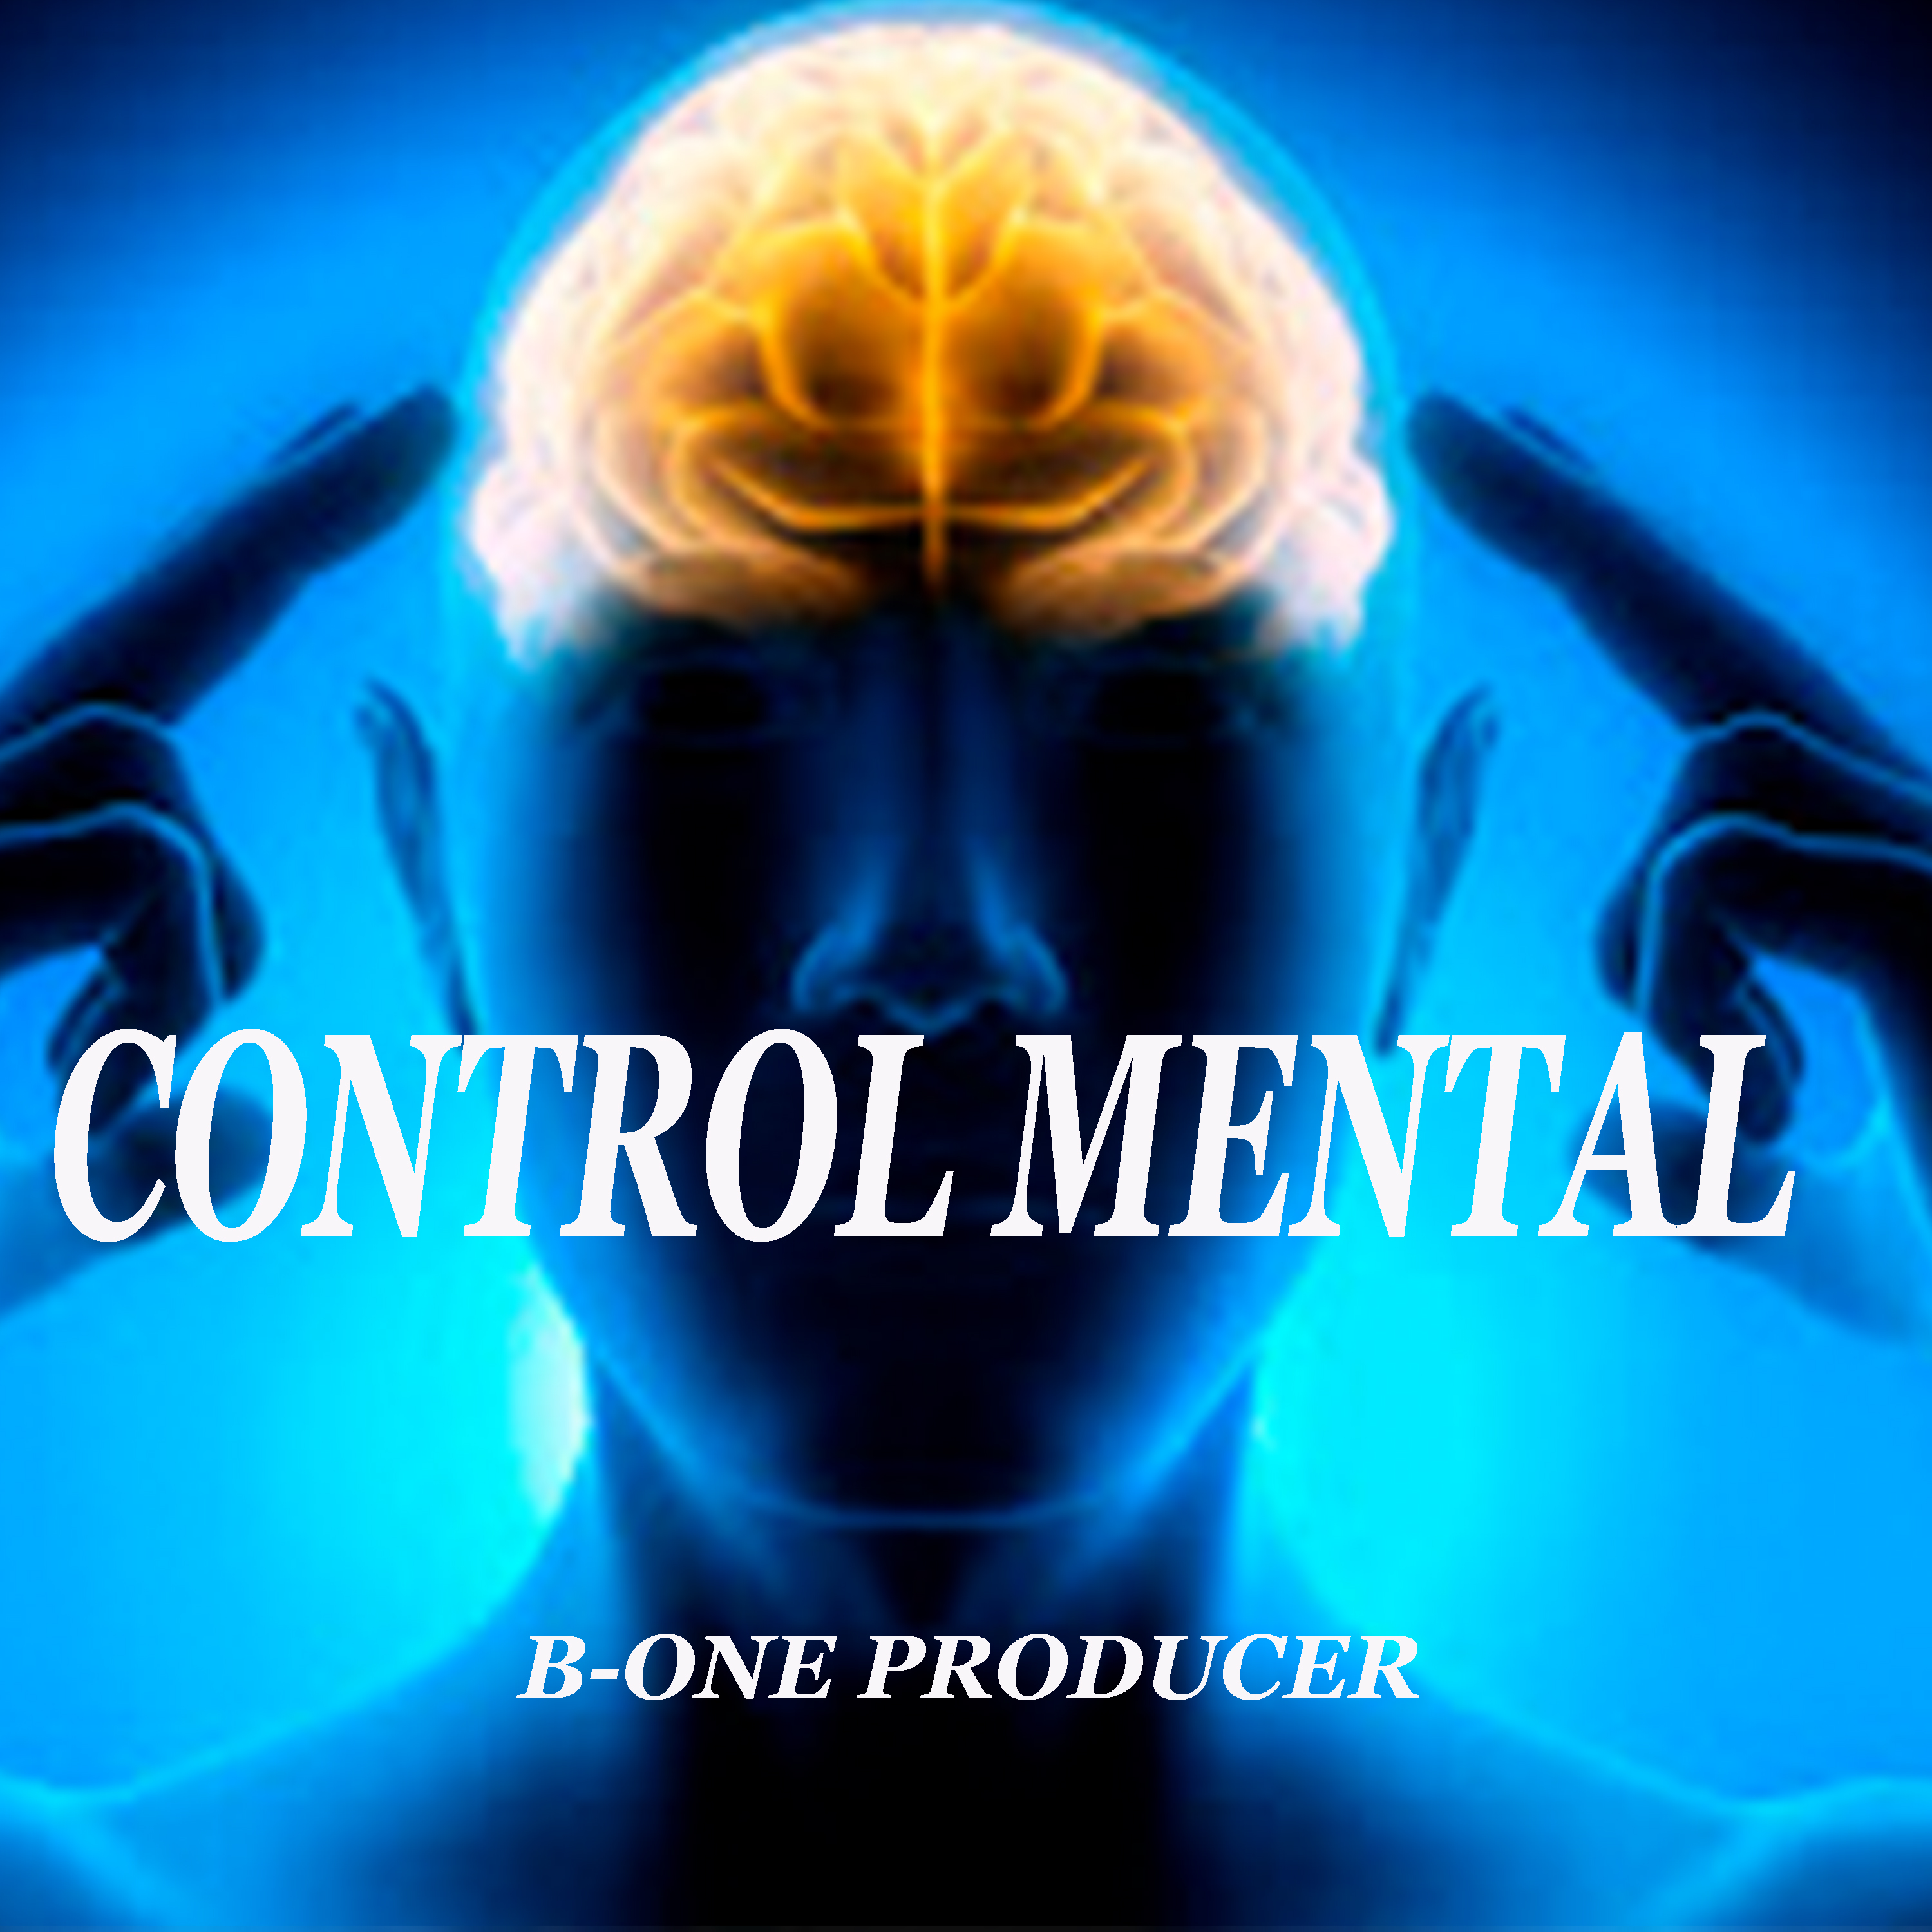 Control mental pictures